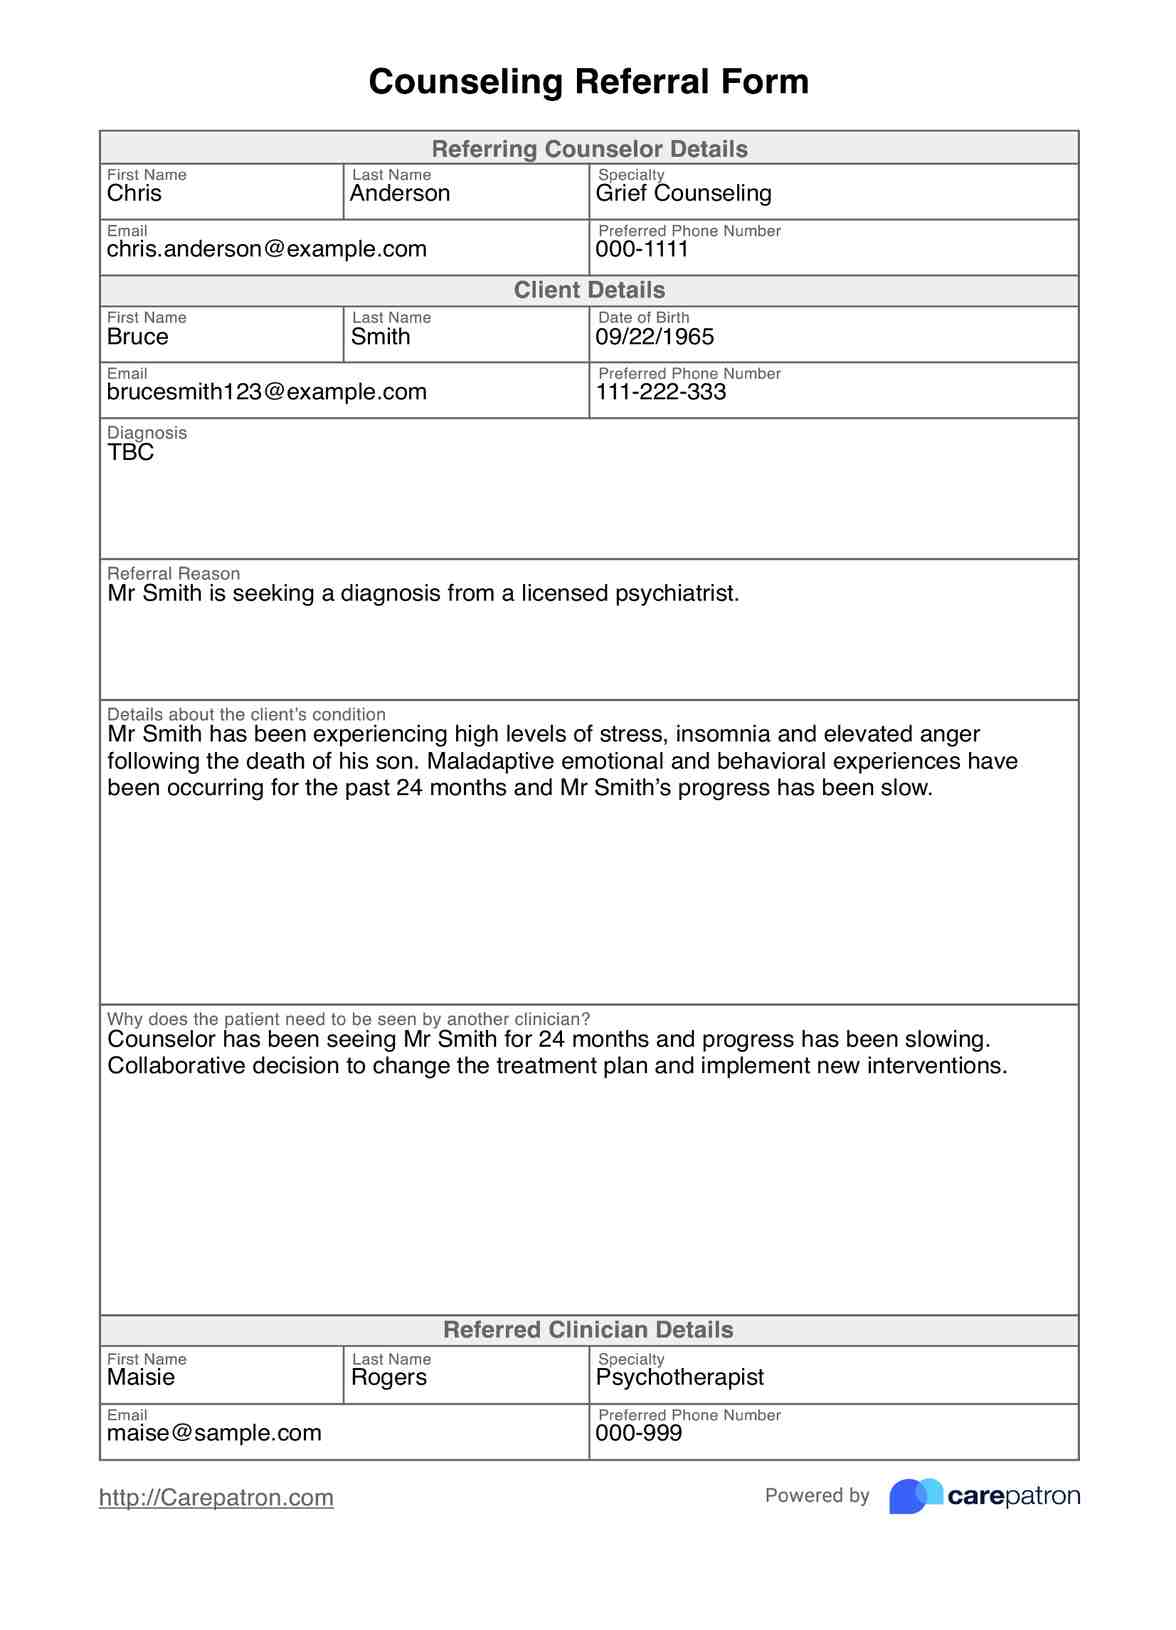 Counseling Referral Form PDF Example